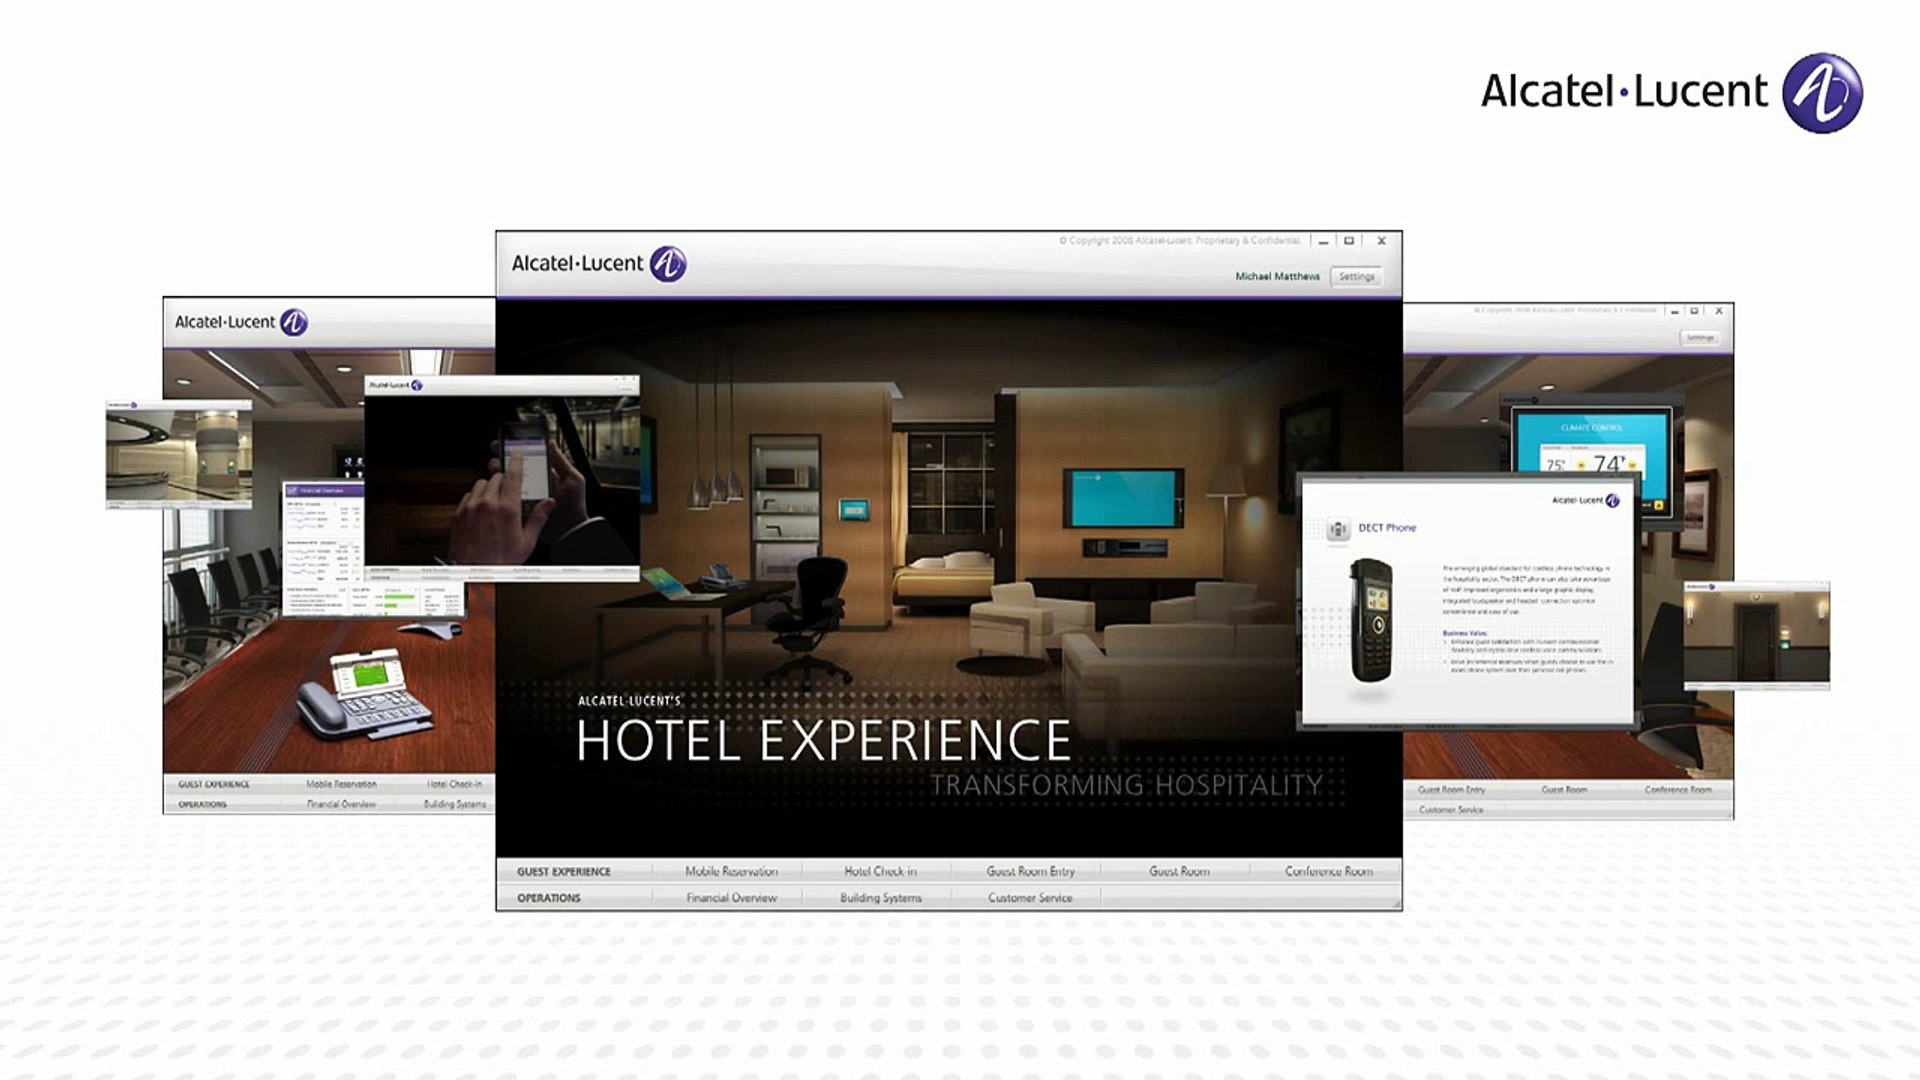 ⁣Hotel Experience - Alcatel-Lucent Virtual Hotel